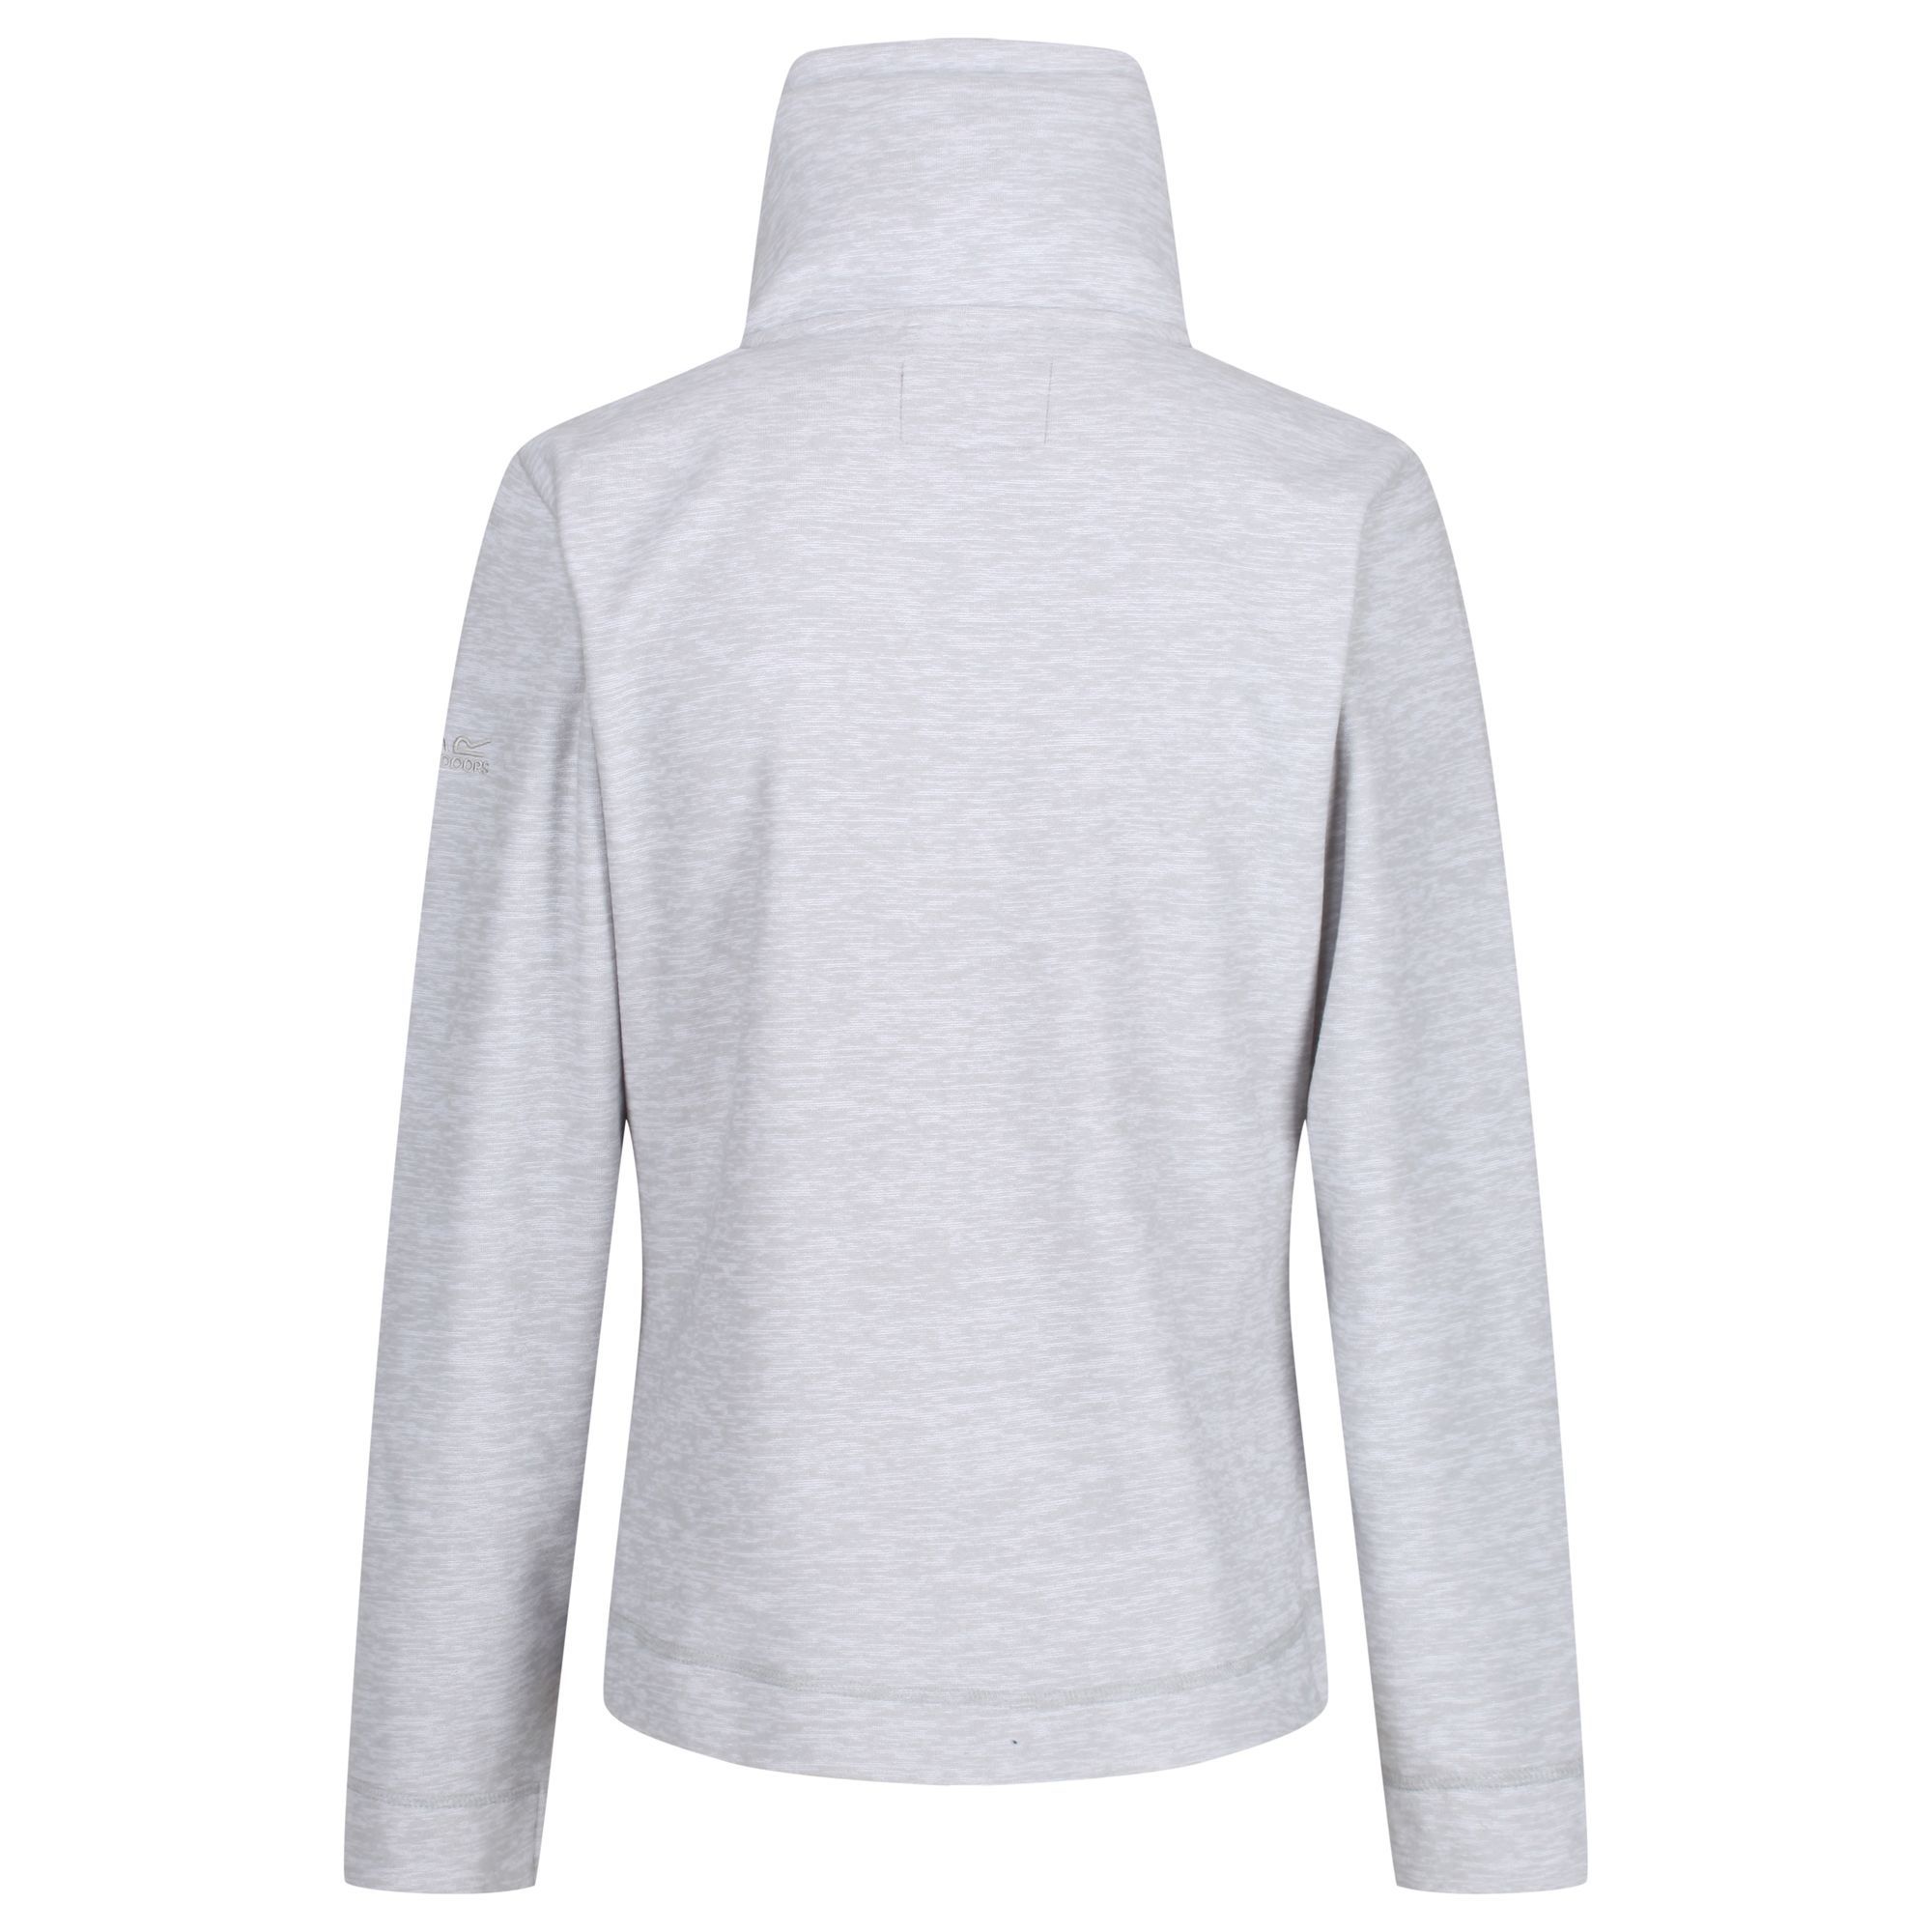 100% polyester marl fleece. Adjustable drawcord at collar. Herringbone trim detail. 2 lower pockets with herringbone tape detail. Curved side seams for a shapely fit. Full zip fastening.